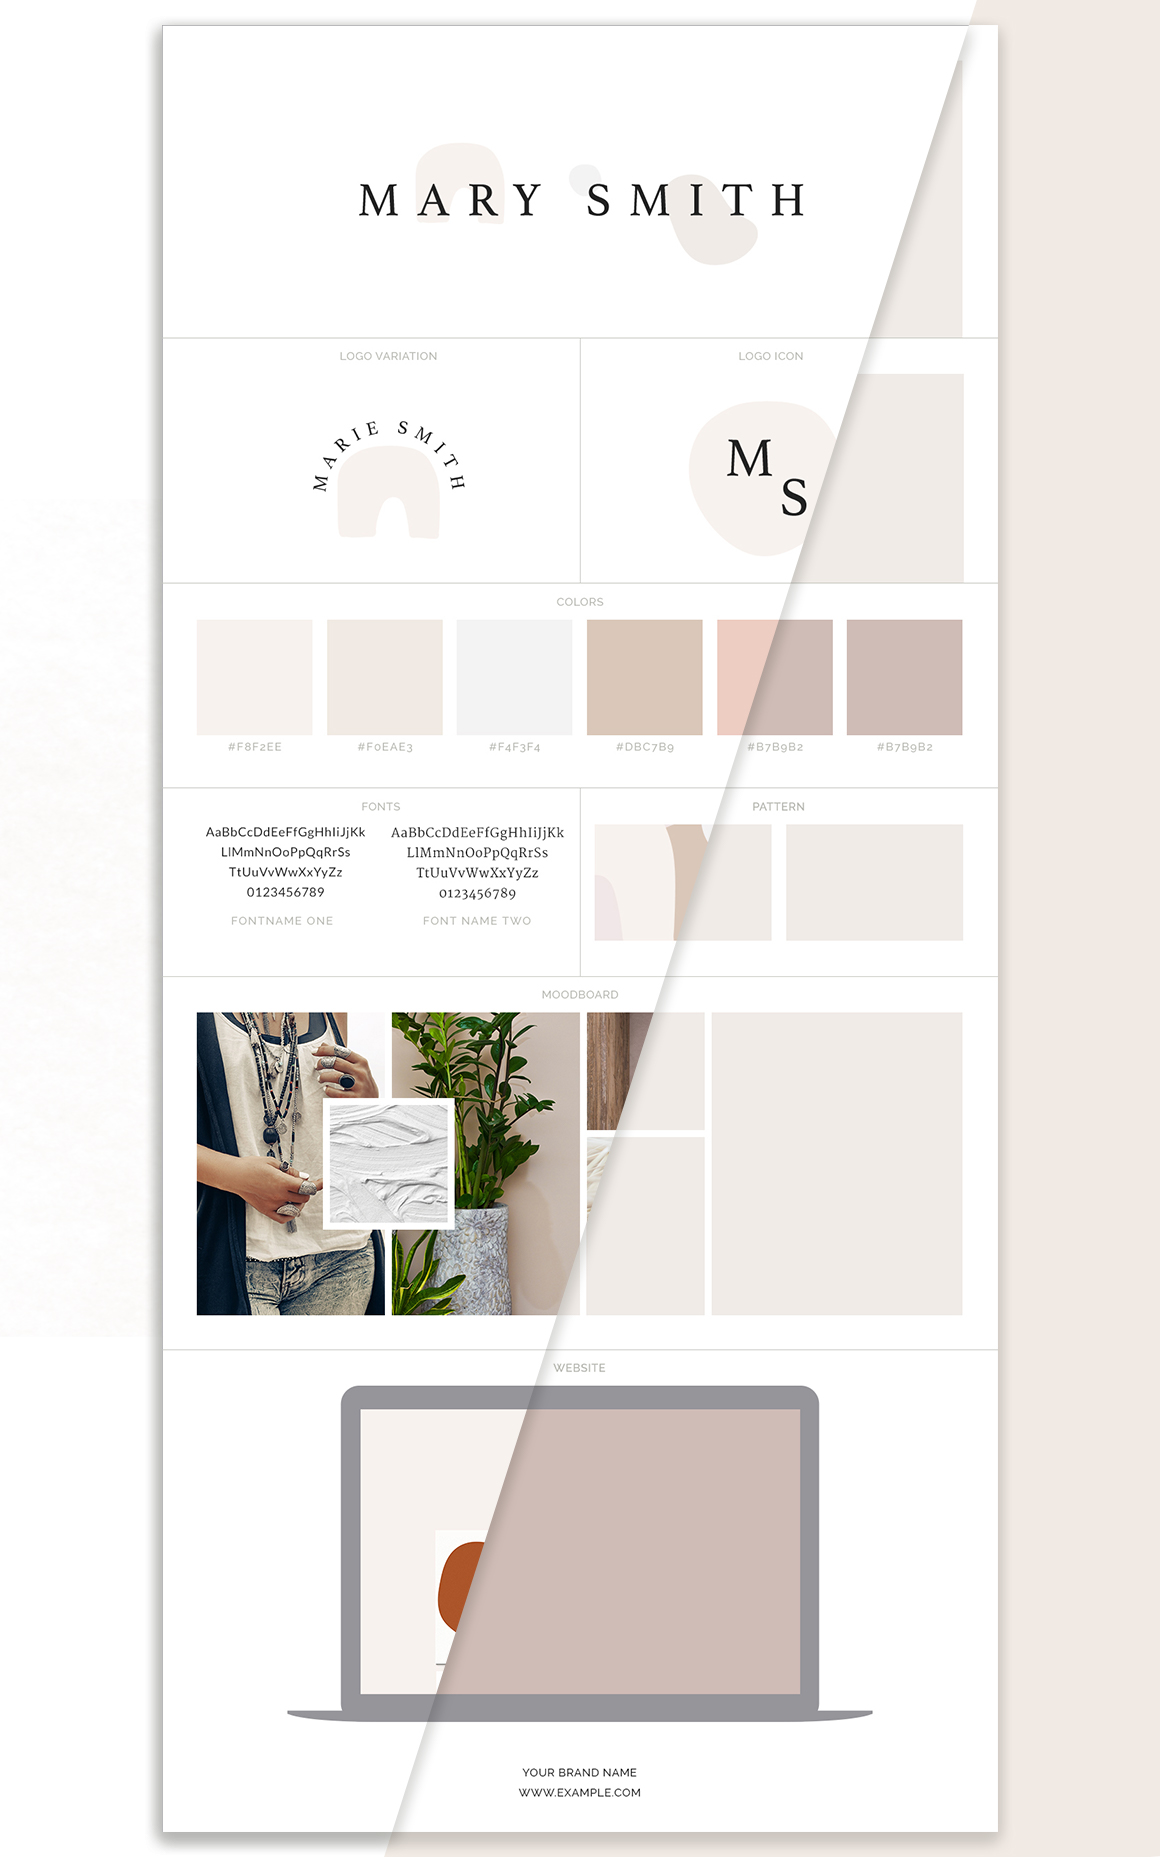 Brand Board Layout Template